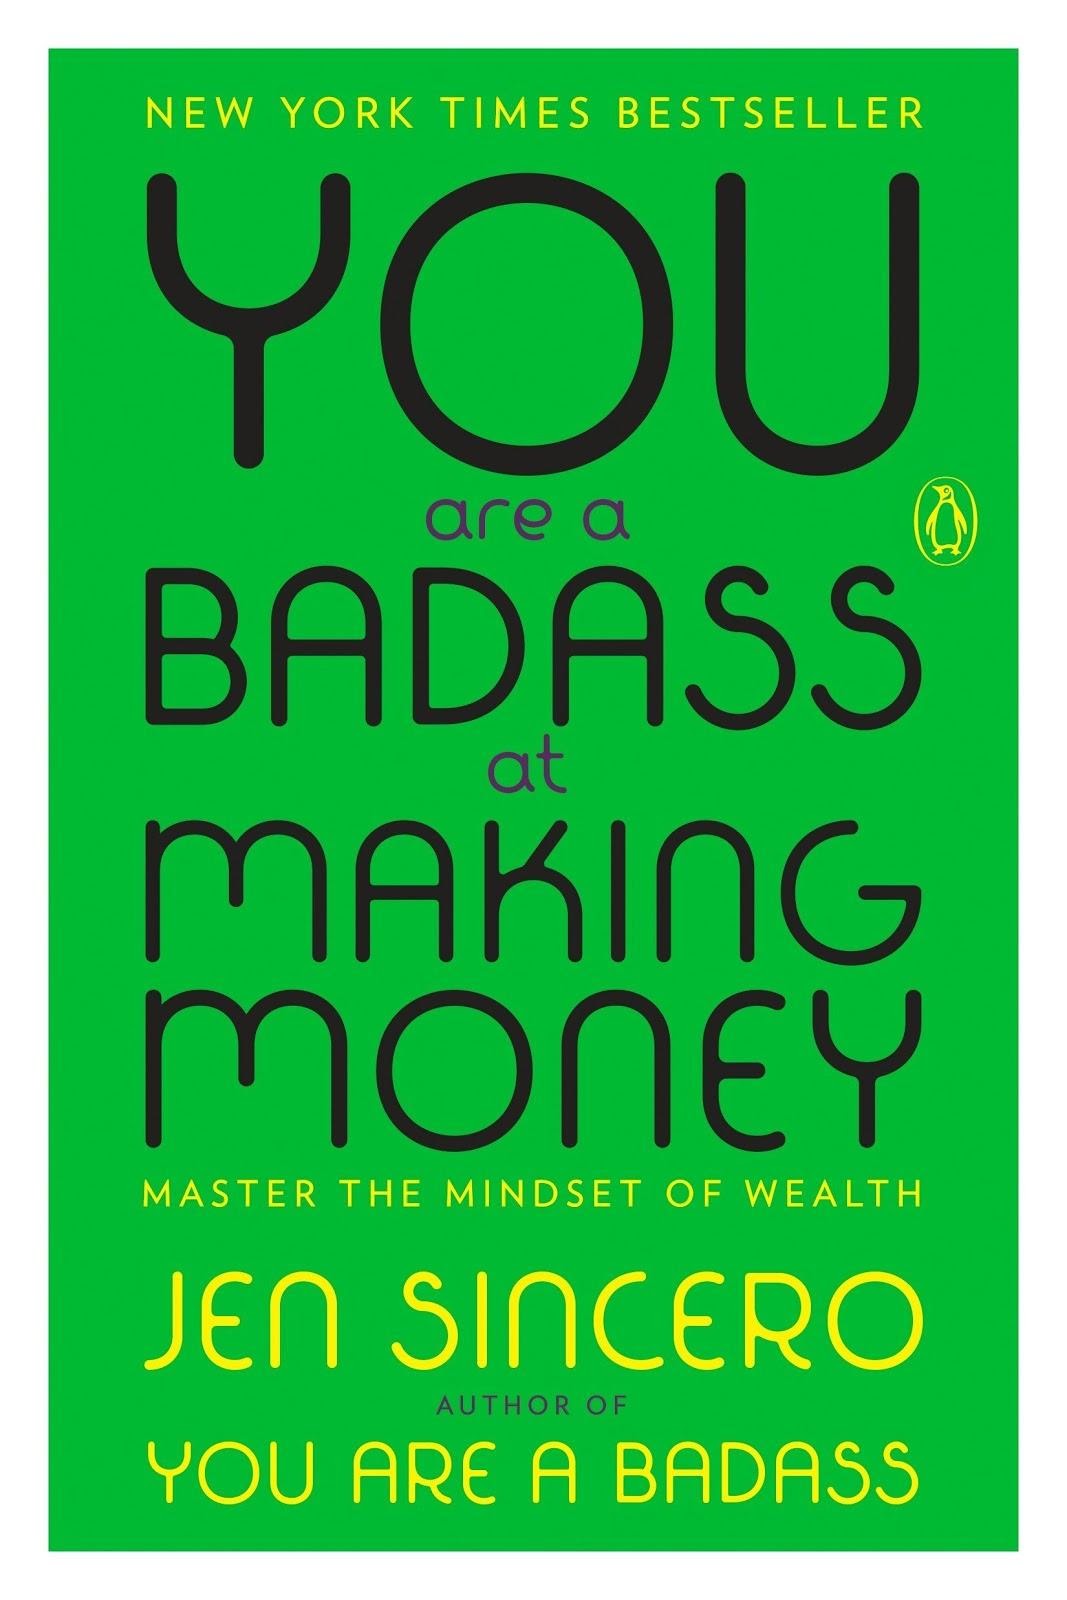 Livro 'You Are a Badass at Making Money'